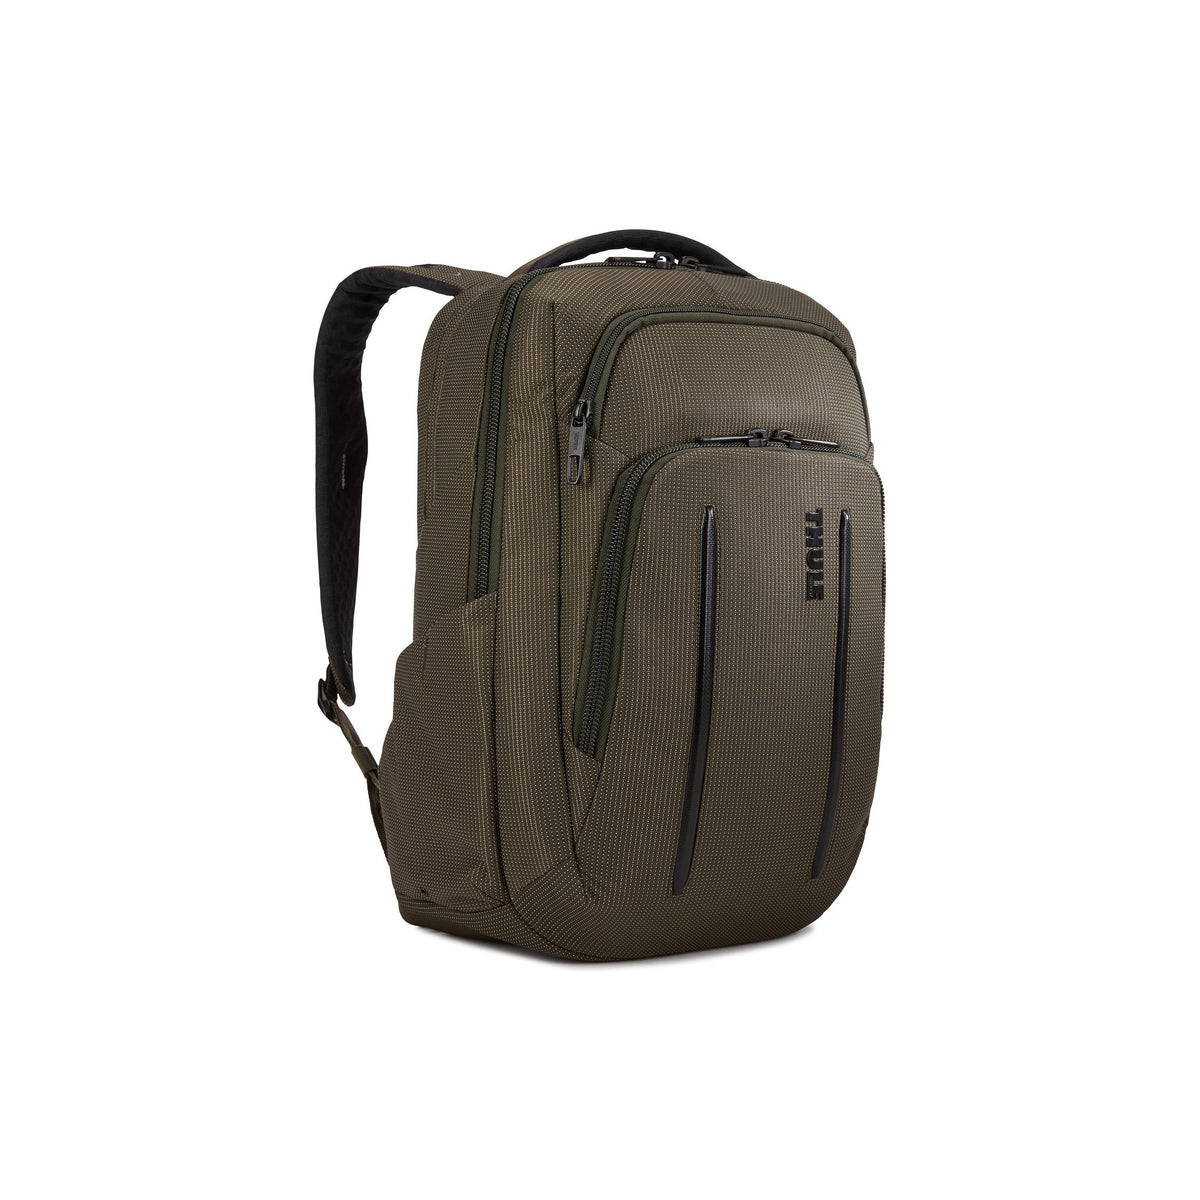 Thule Crossover 2 20L Backpack